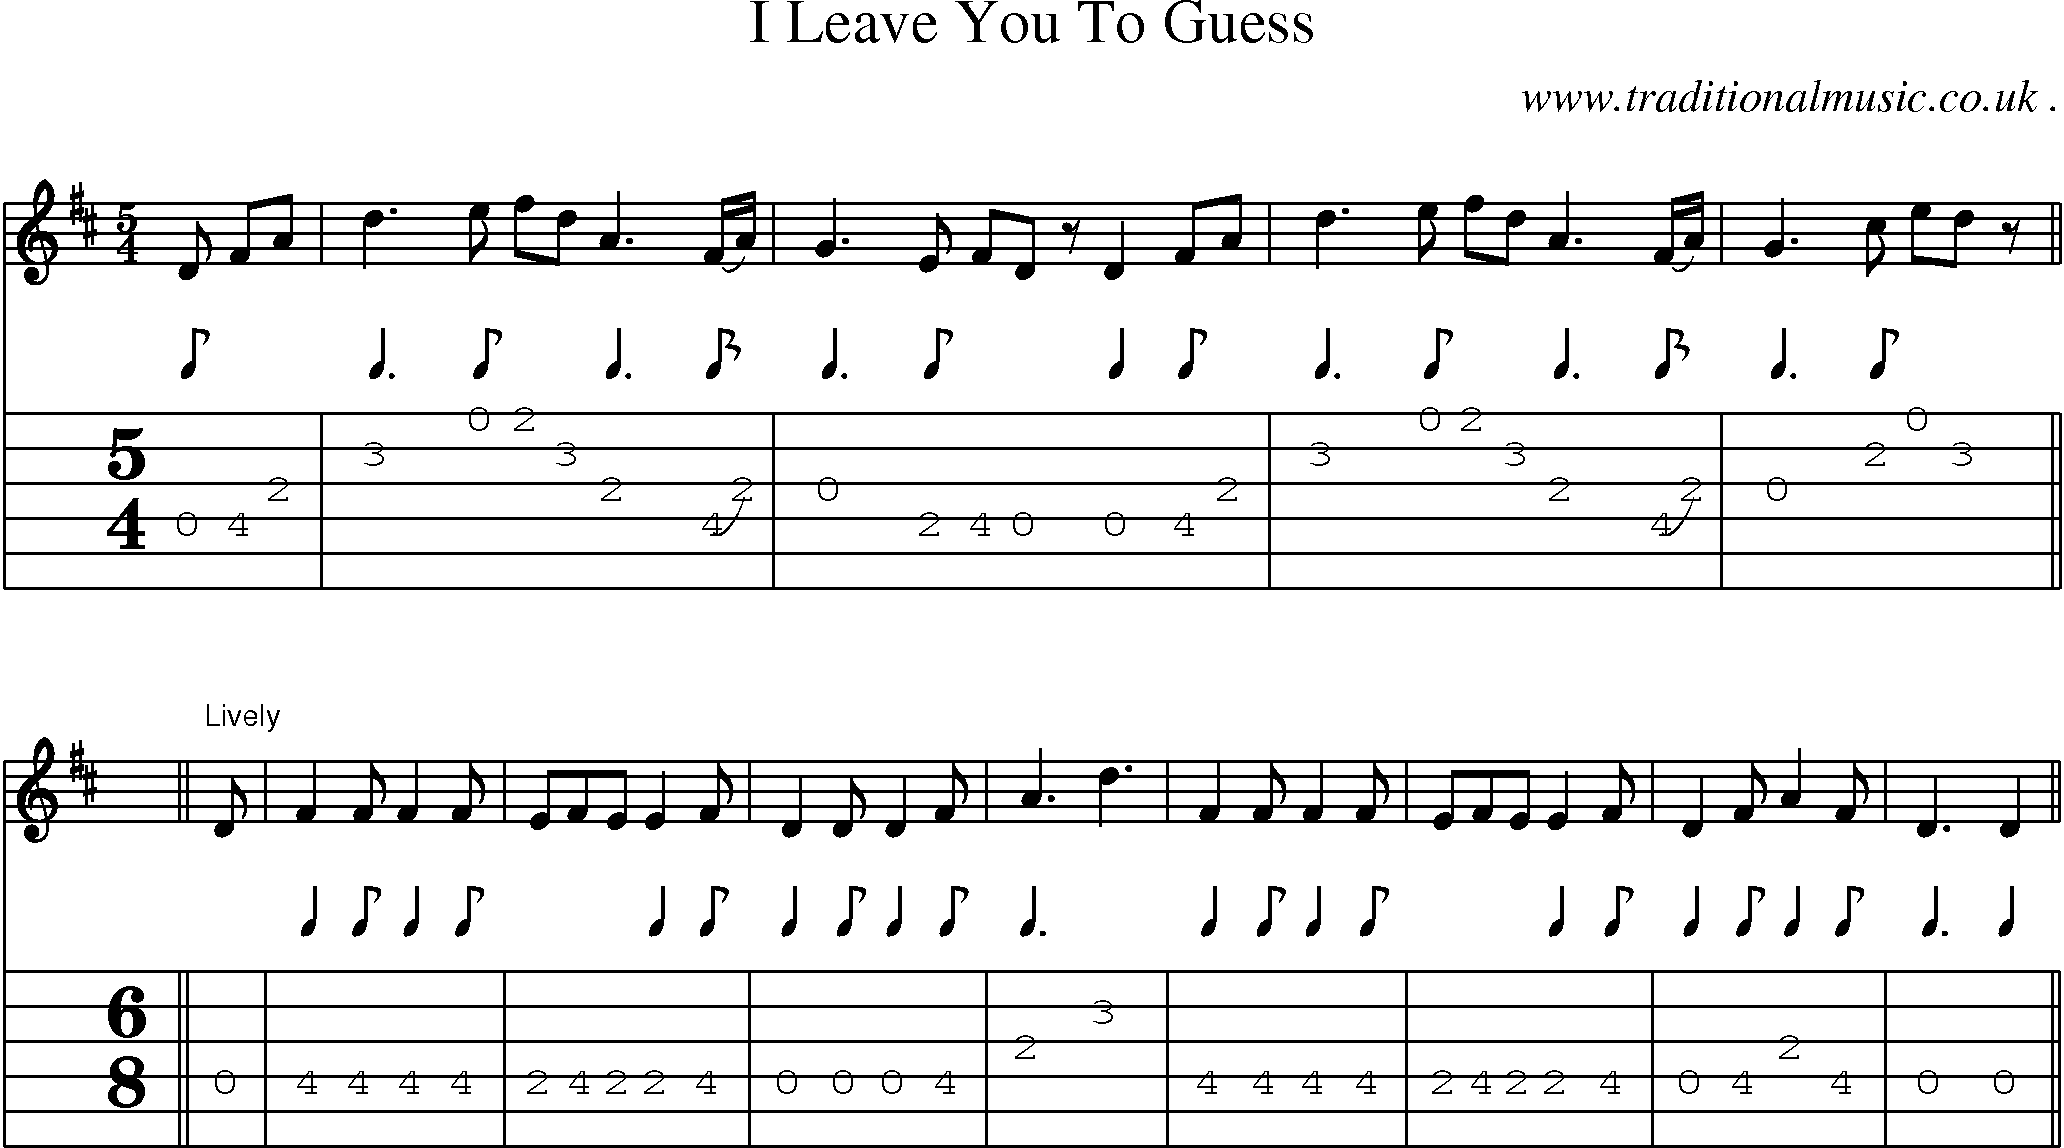 Sheet-music  score, Chords and Guitar Tabs for I Leave You To Guess